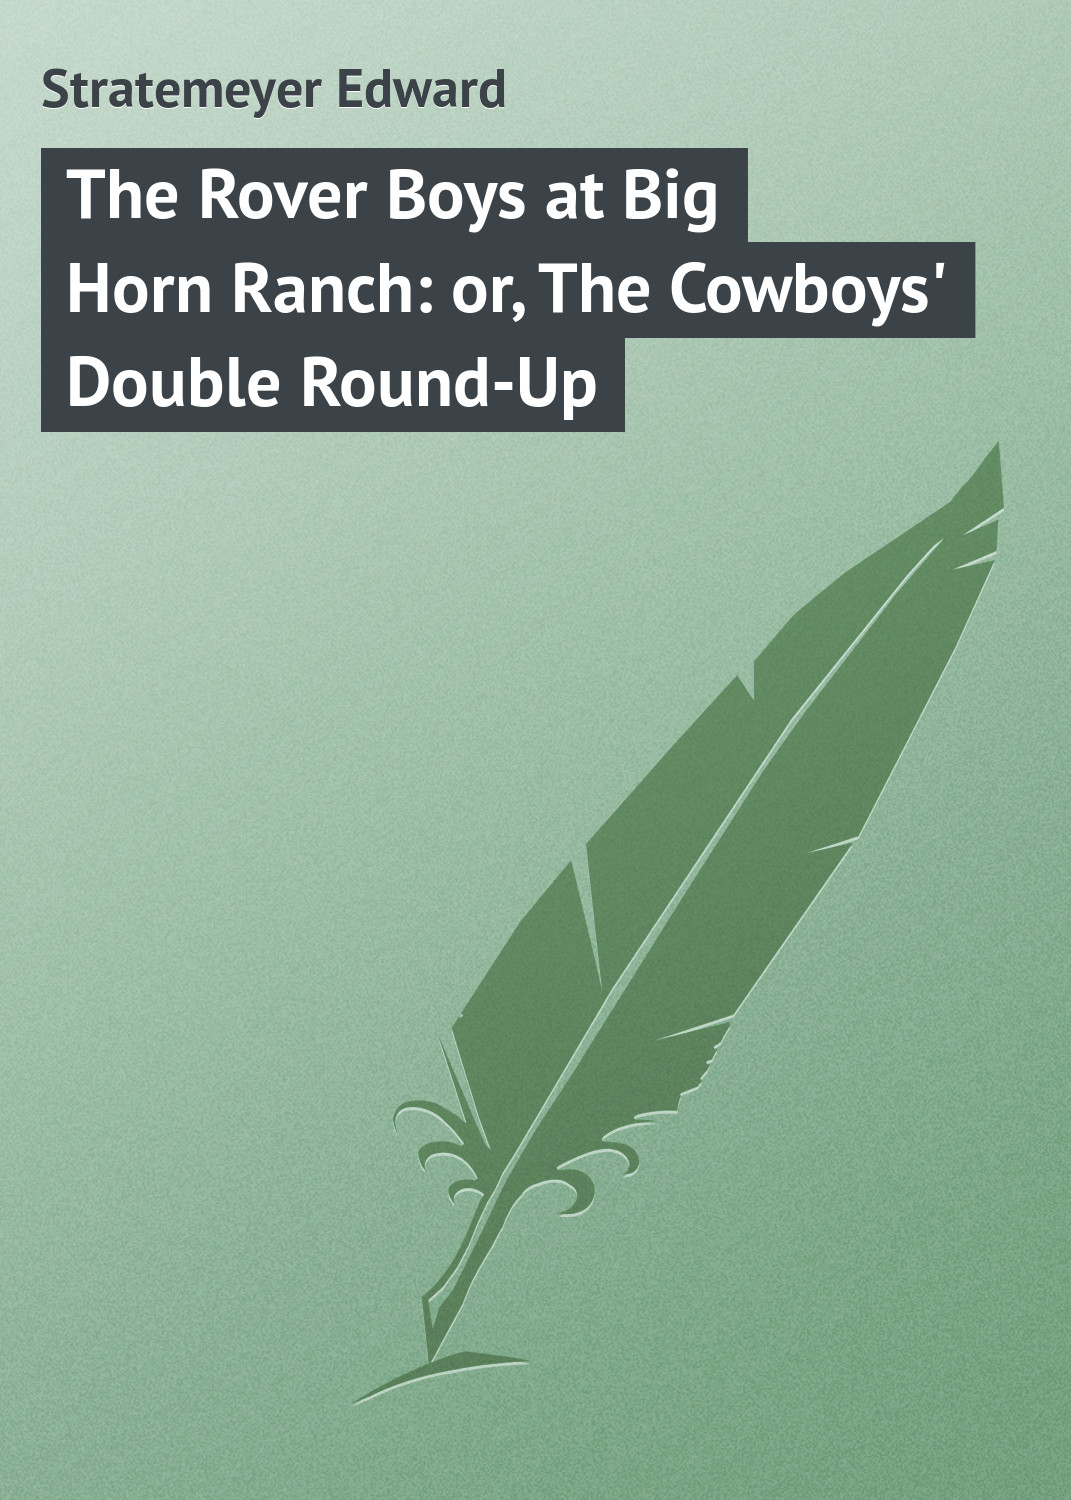 The Rover Boys at Big Horn Ranch: or, The Cowboys'Double Round-Up